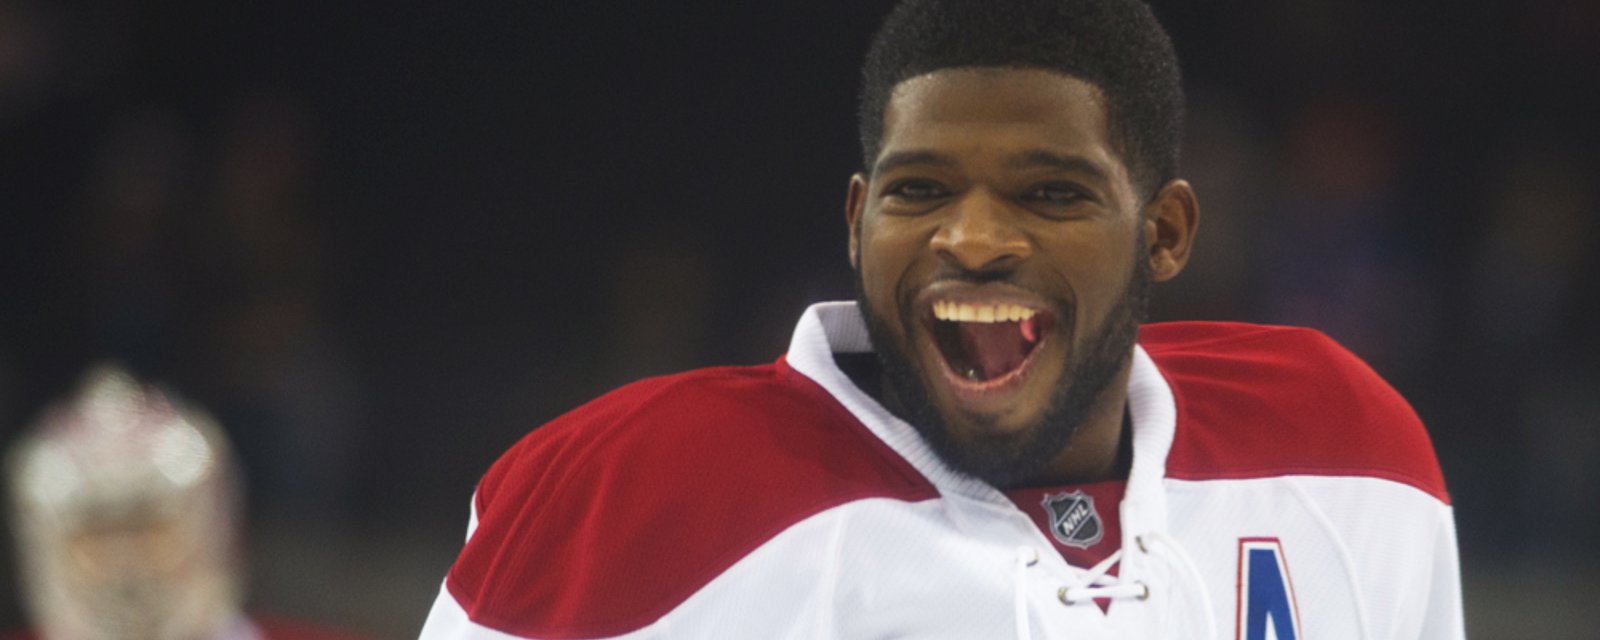 Former teammate and friend also publicly calls out P.K. Subban's terrible breath.